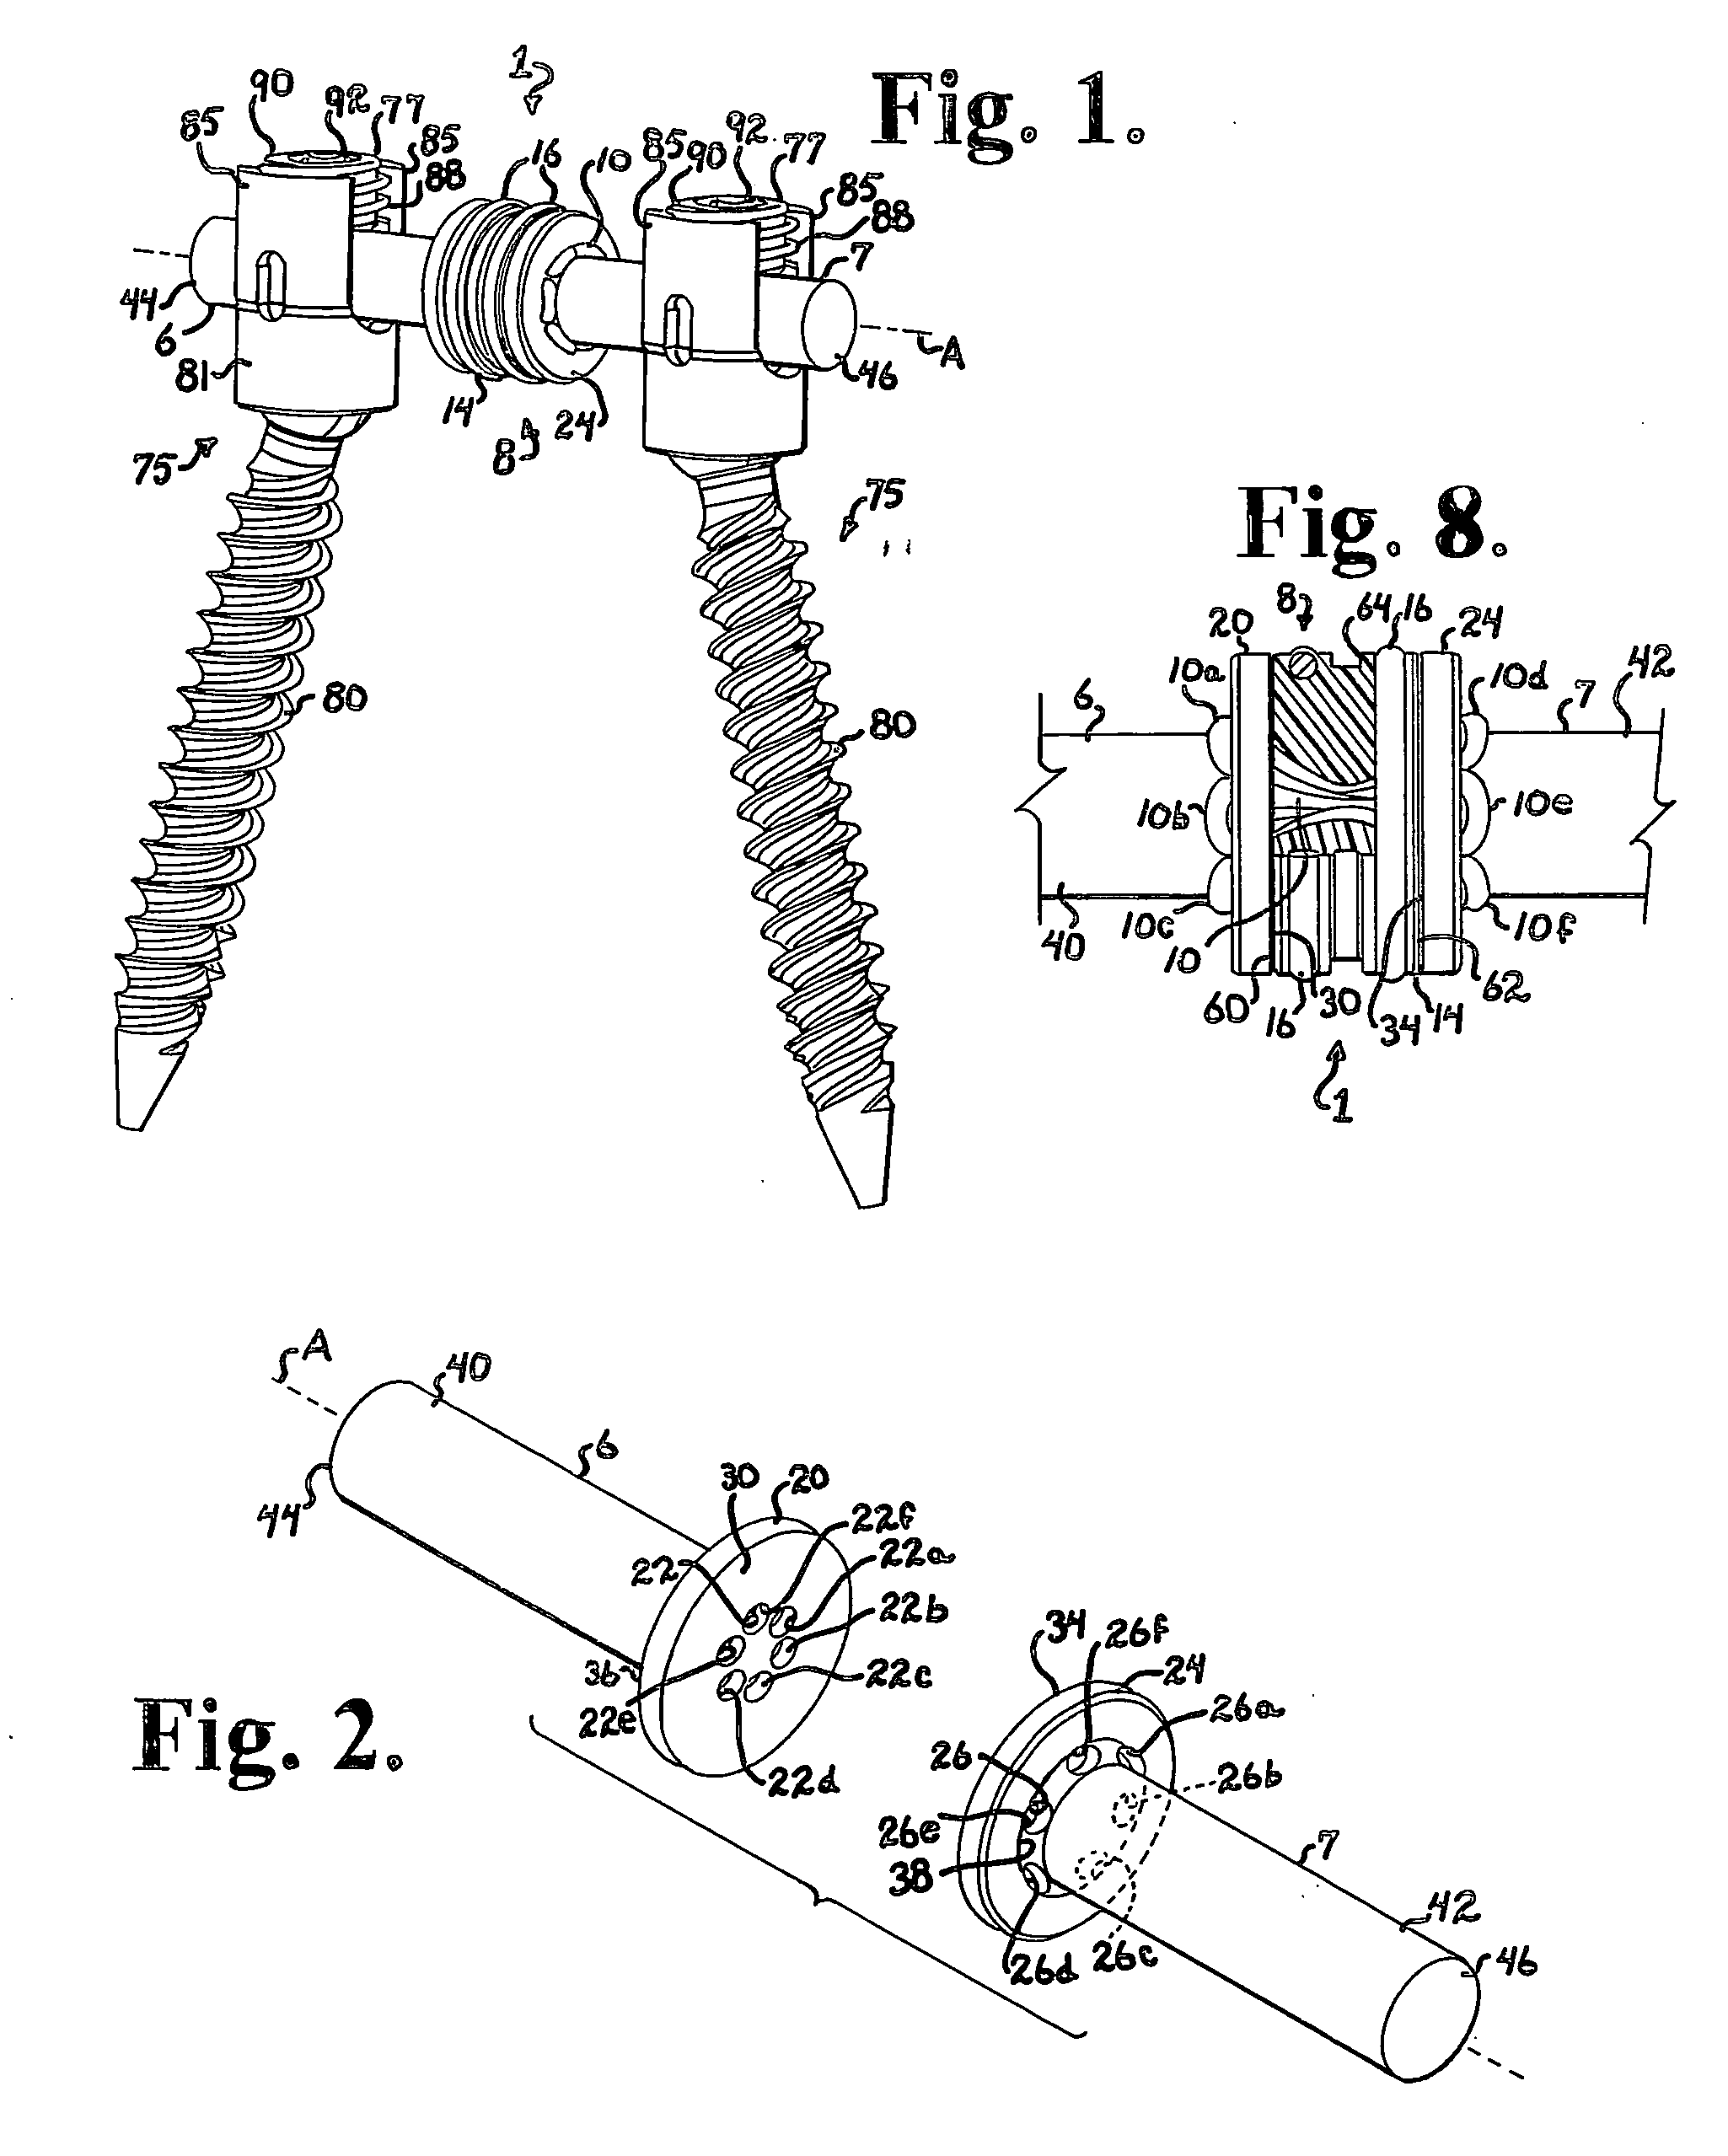 Soft stabilization assemblies with pretensioned cords